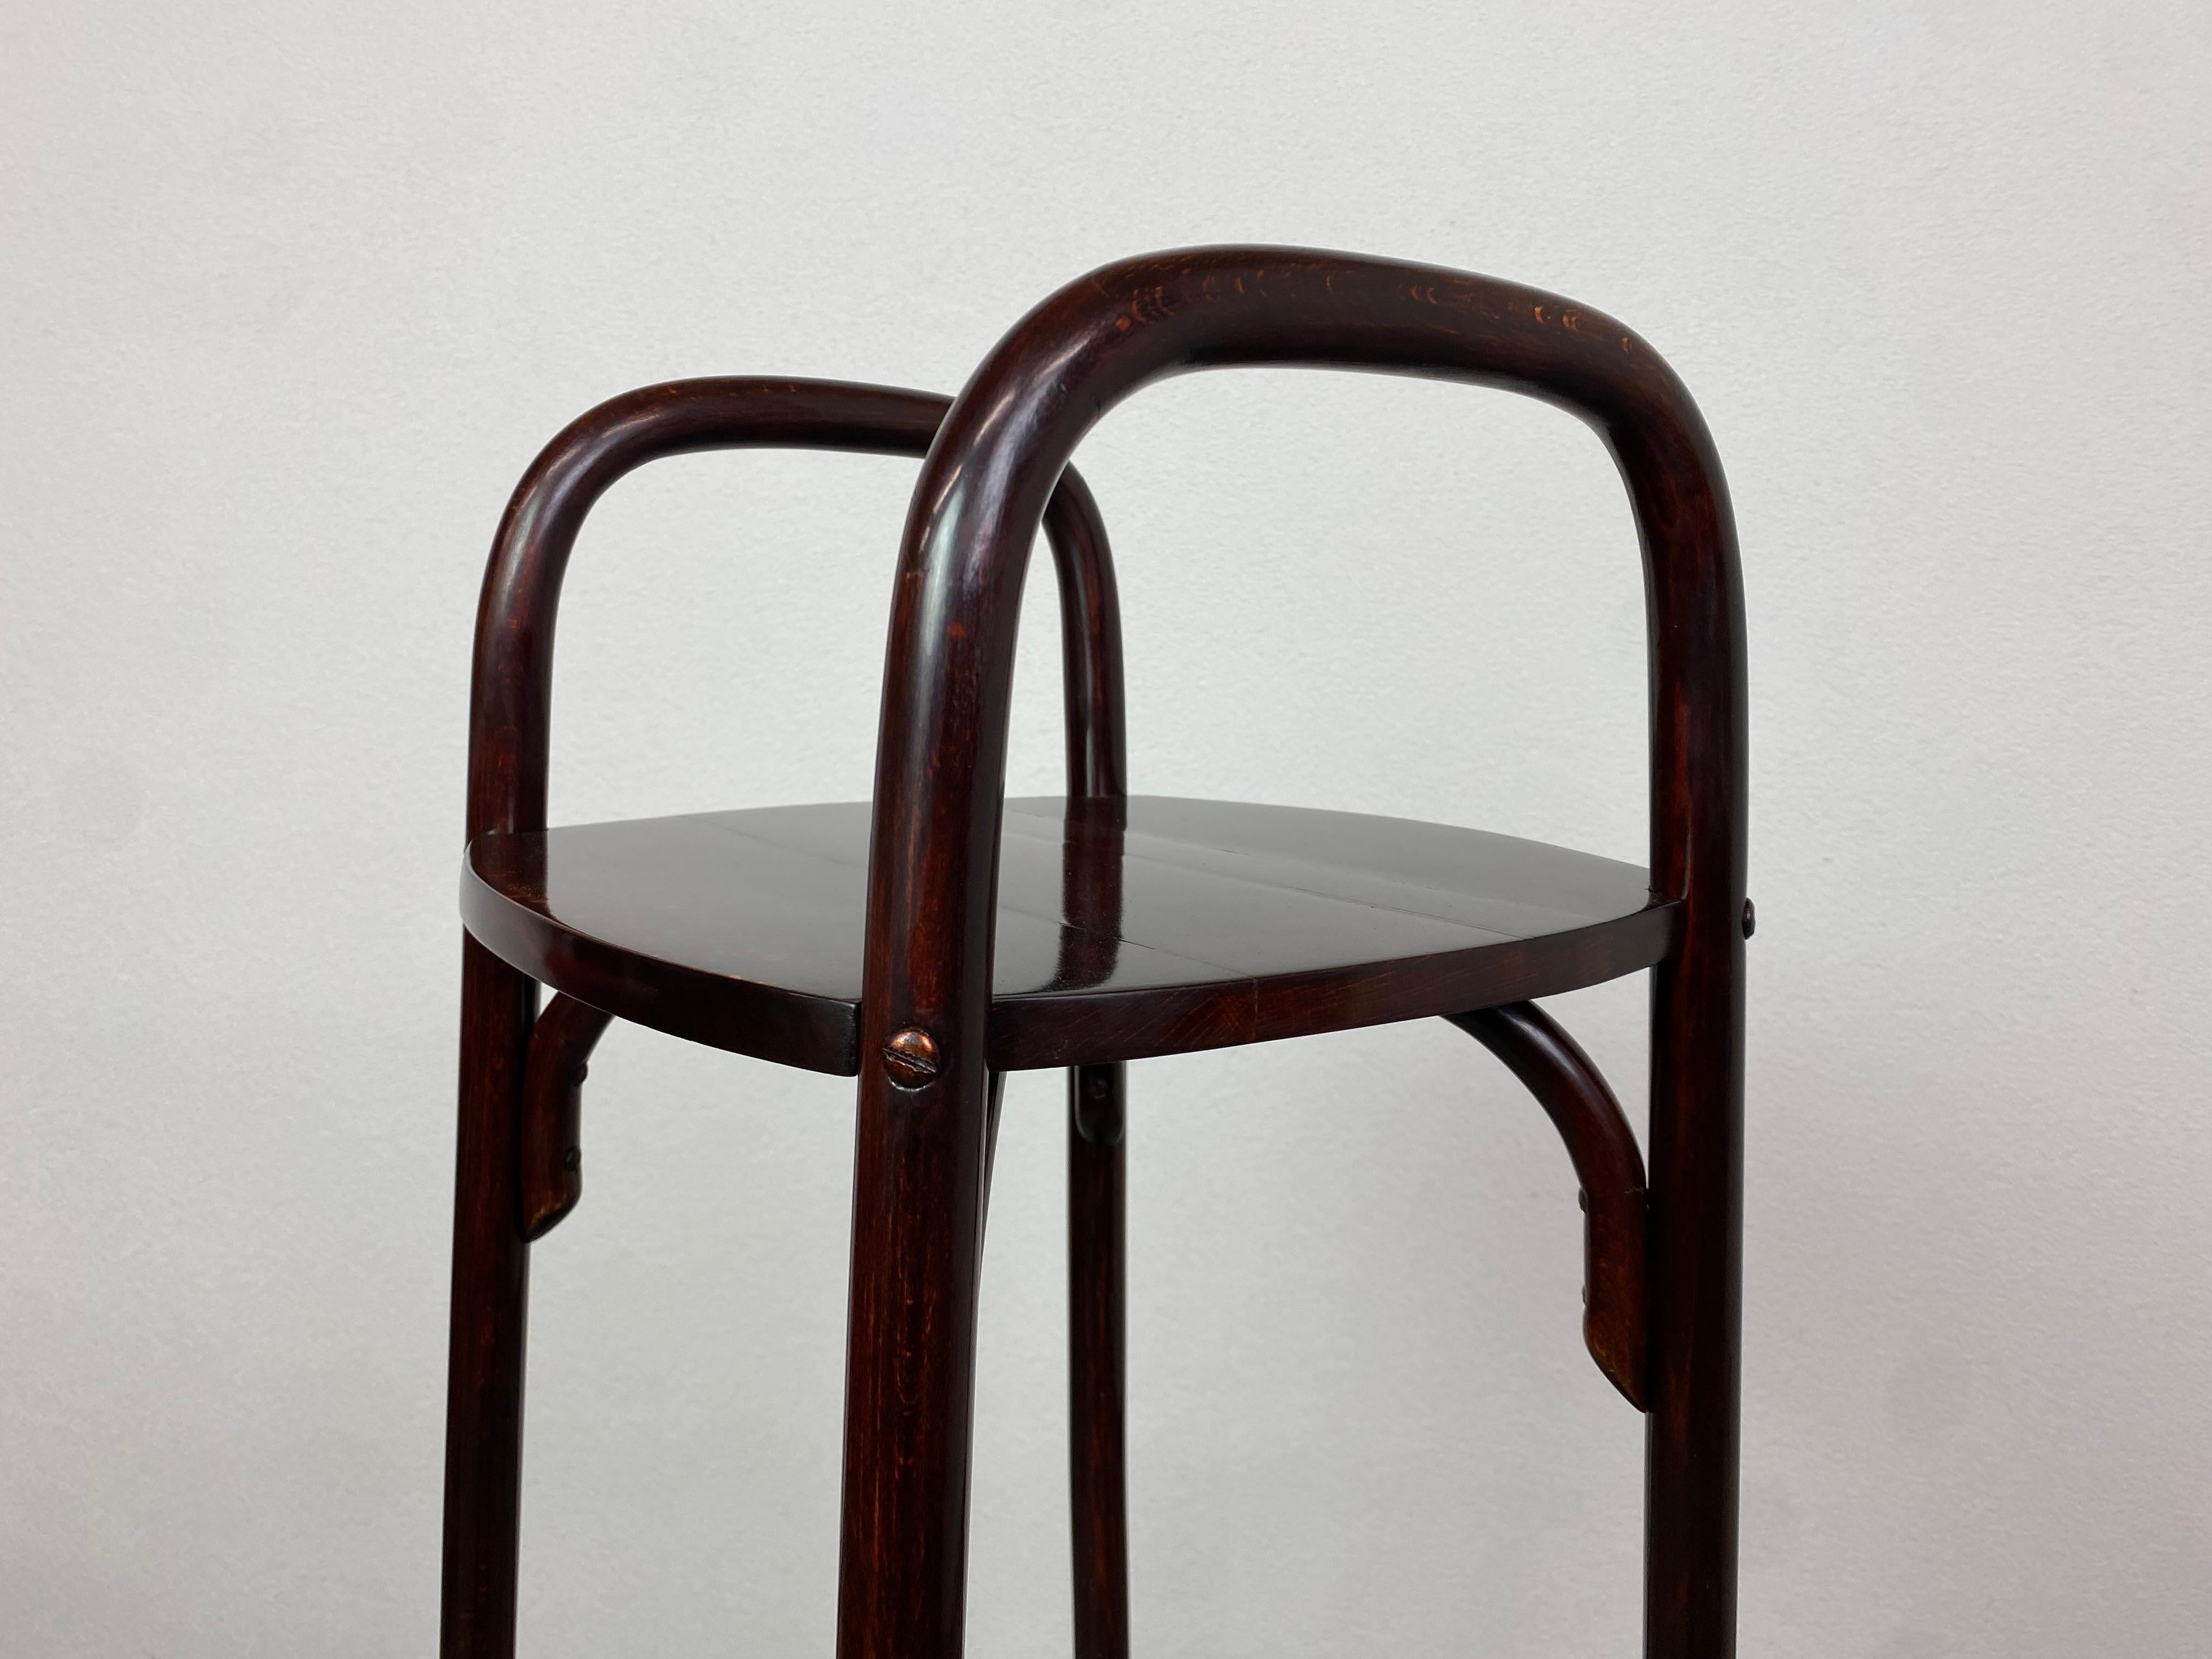 Secession plant stand by Josef Hoffmann for Thonet In Excellent Condition For Sale In Banská Štiavnica, SK